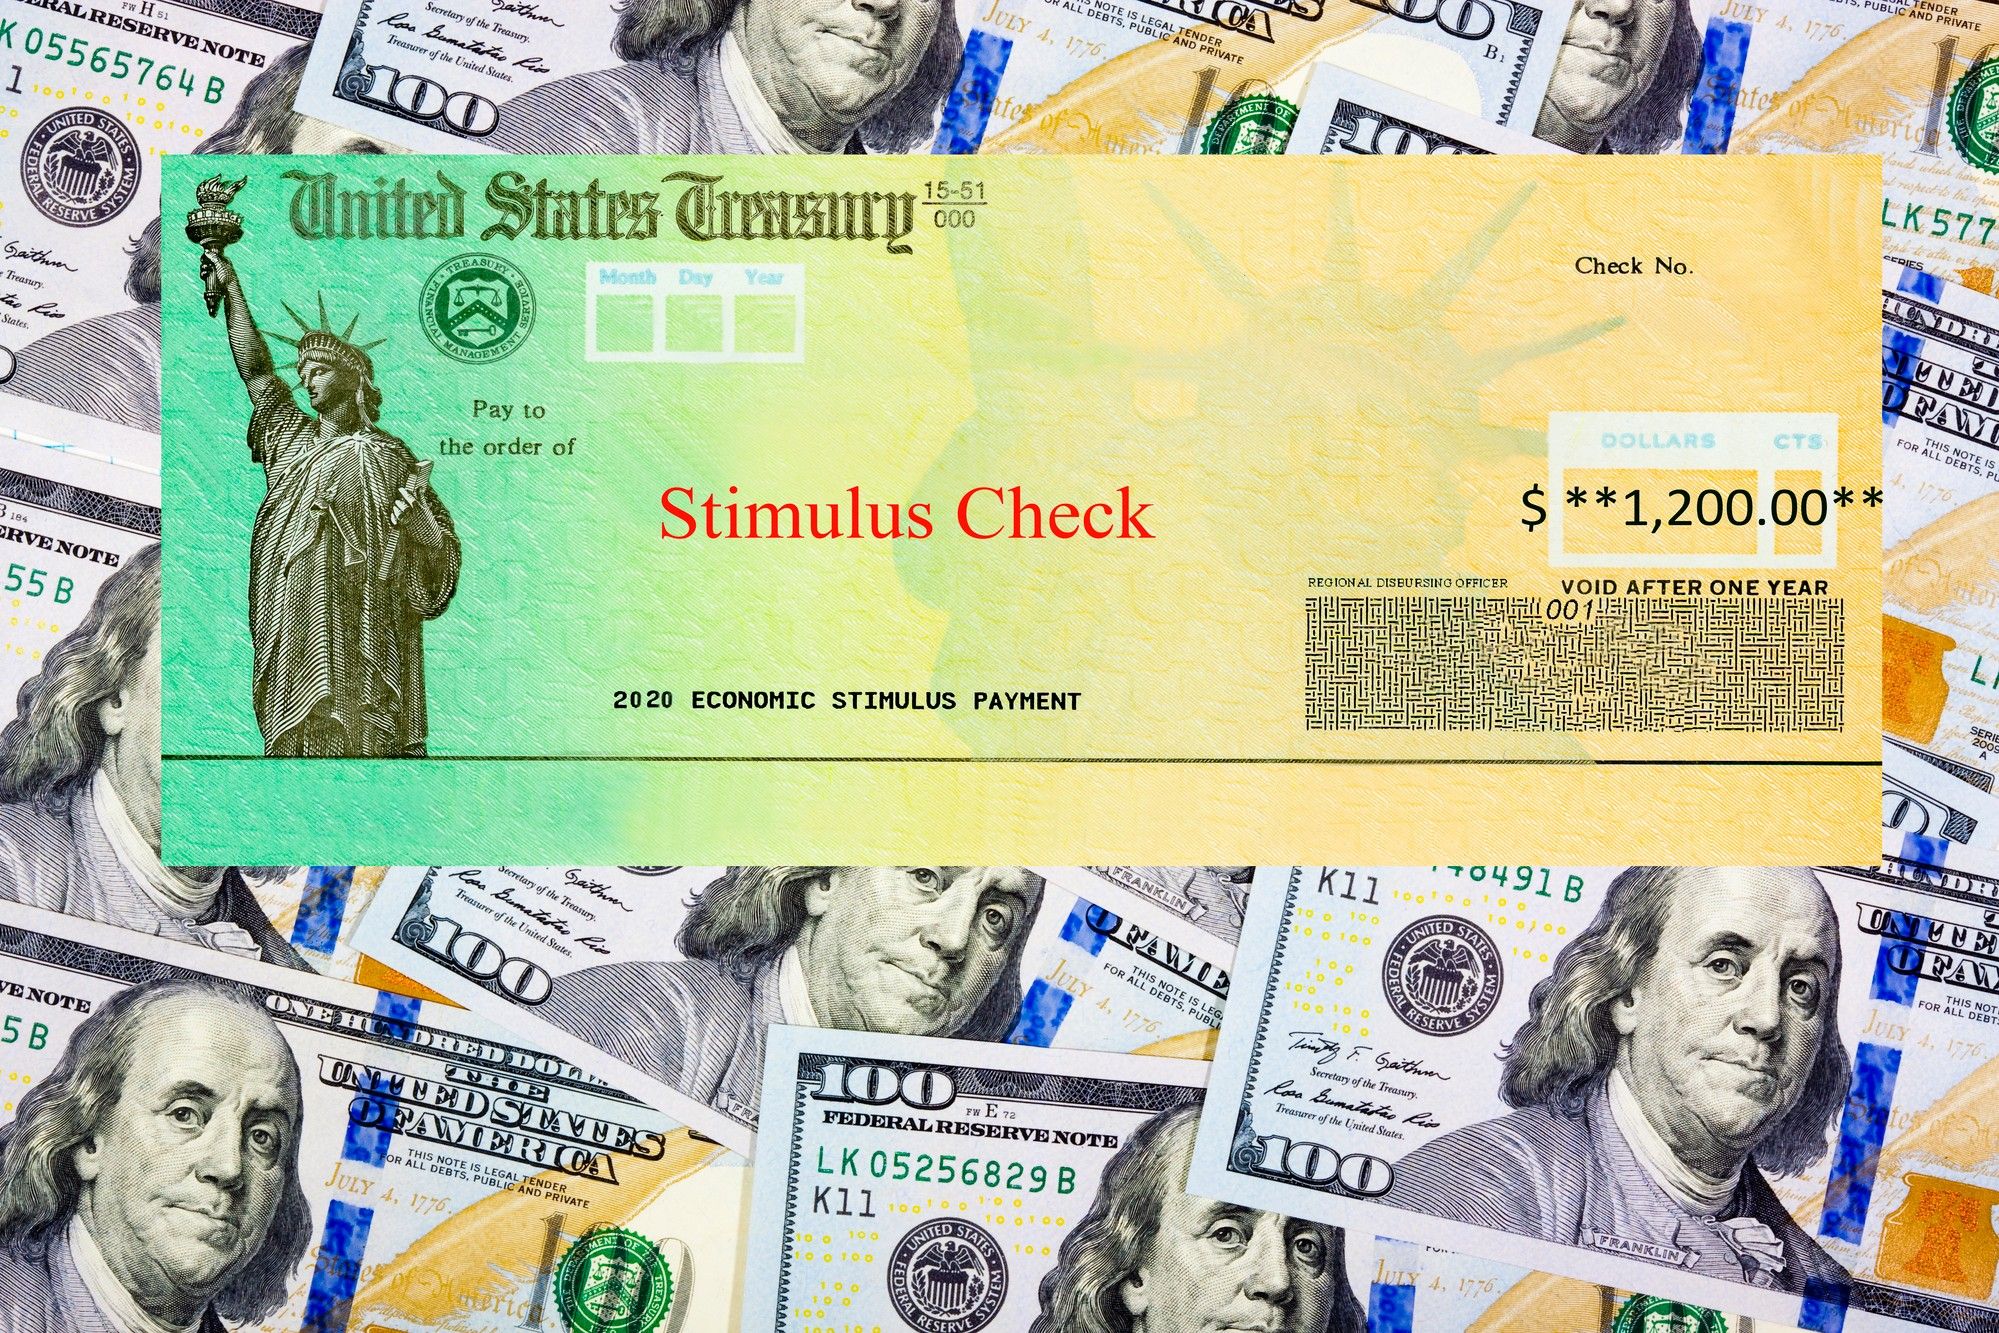 A new ruling requires CARES Act stimulus checks for inmates.